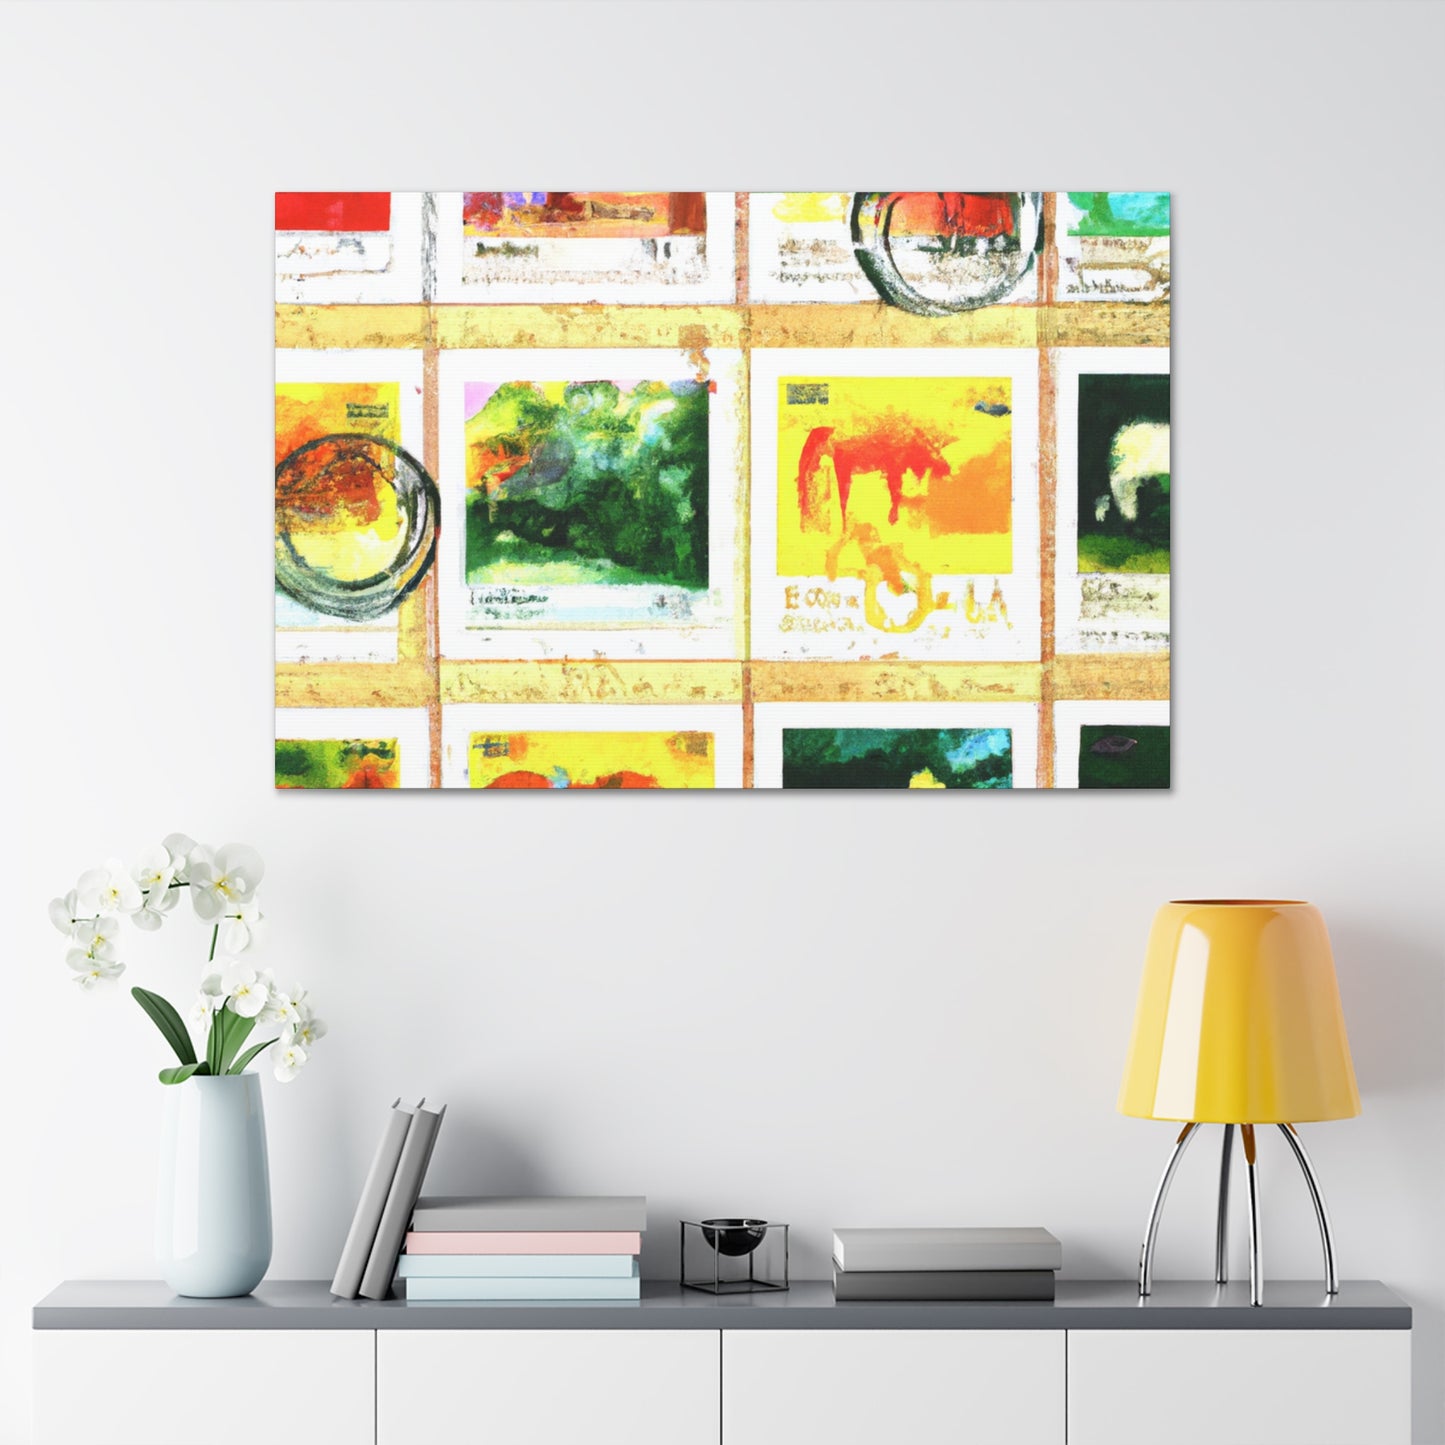 Global Stamp Collection - Postage Stamp Collector Canvas Wall Art